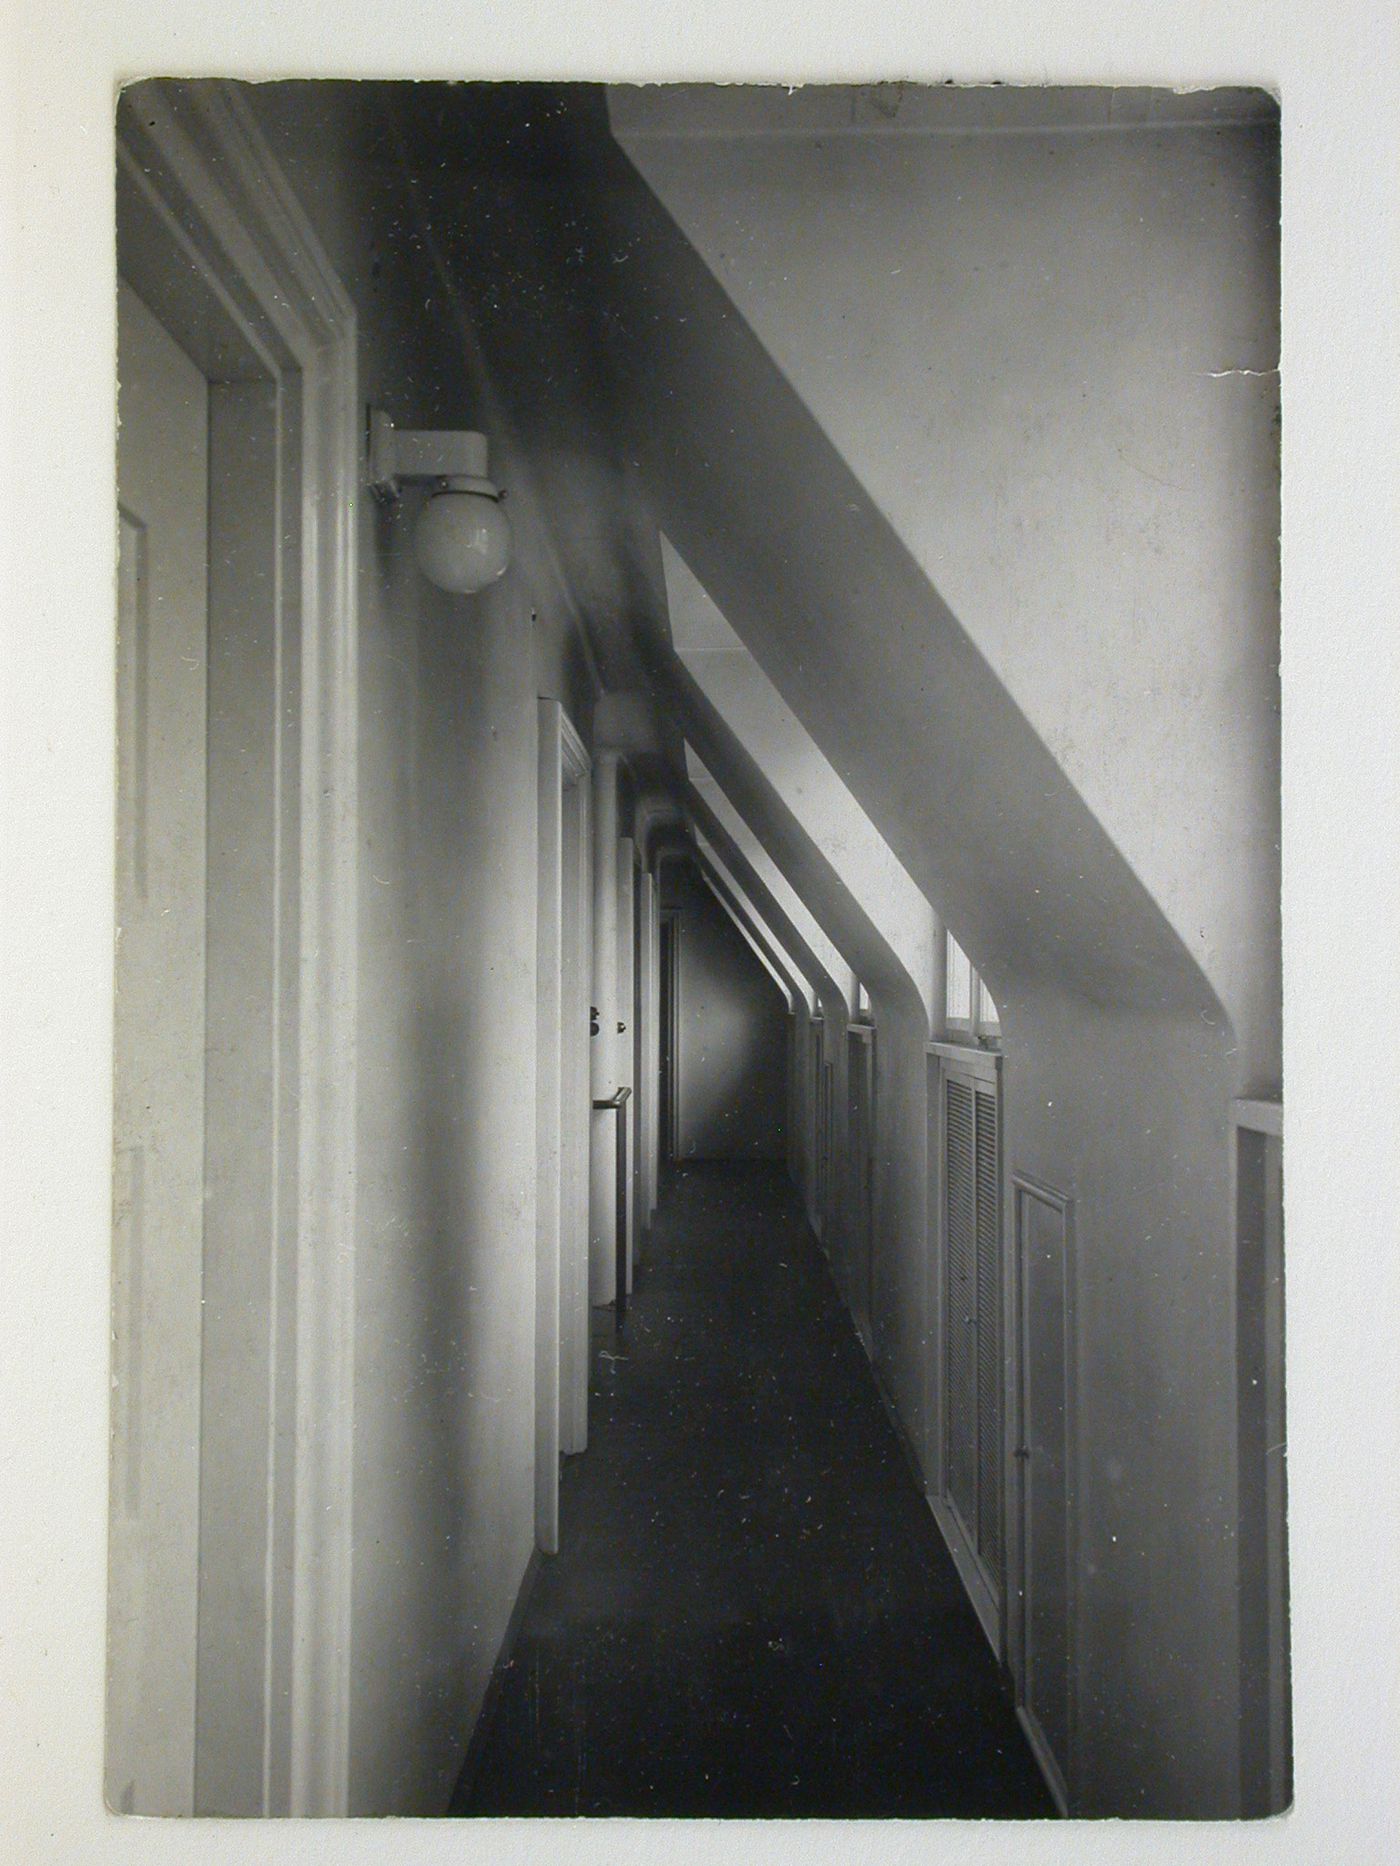 Interior view of a corridor in a building designed by Josef Franz Maria Hoffmann